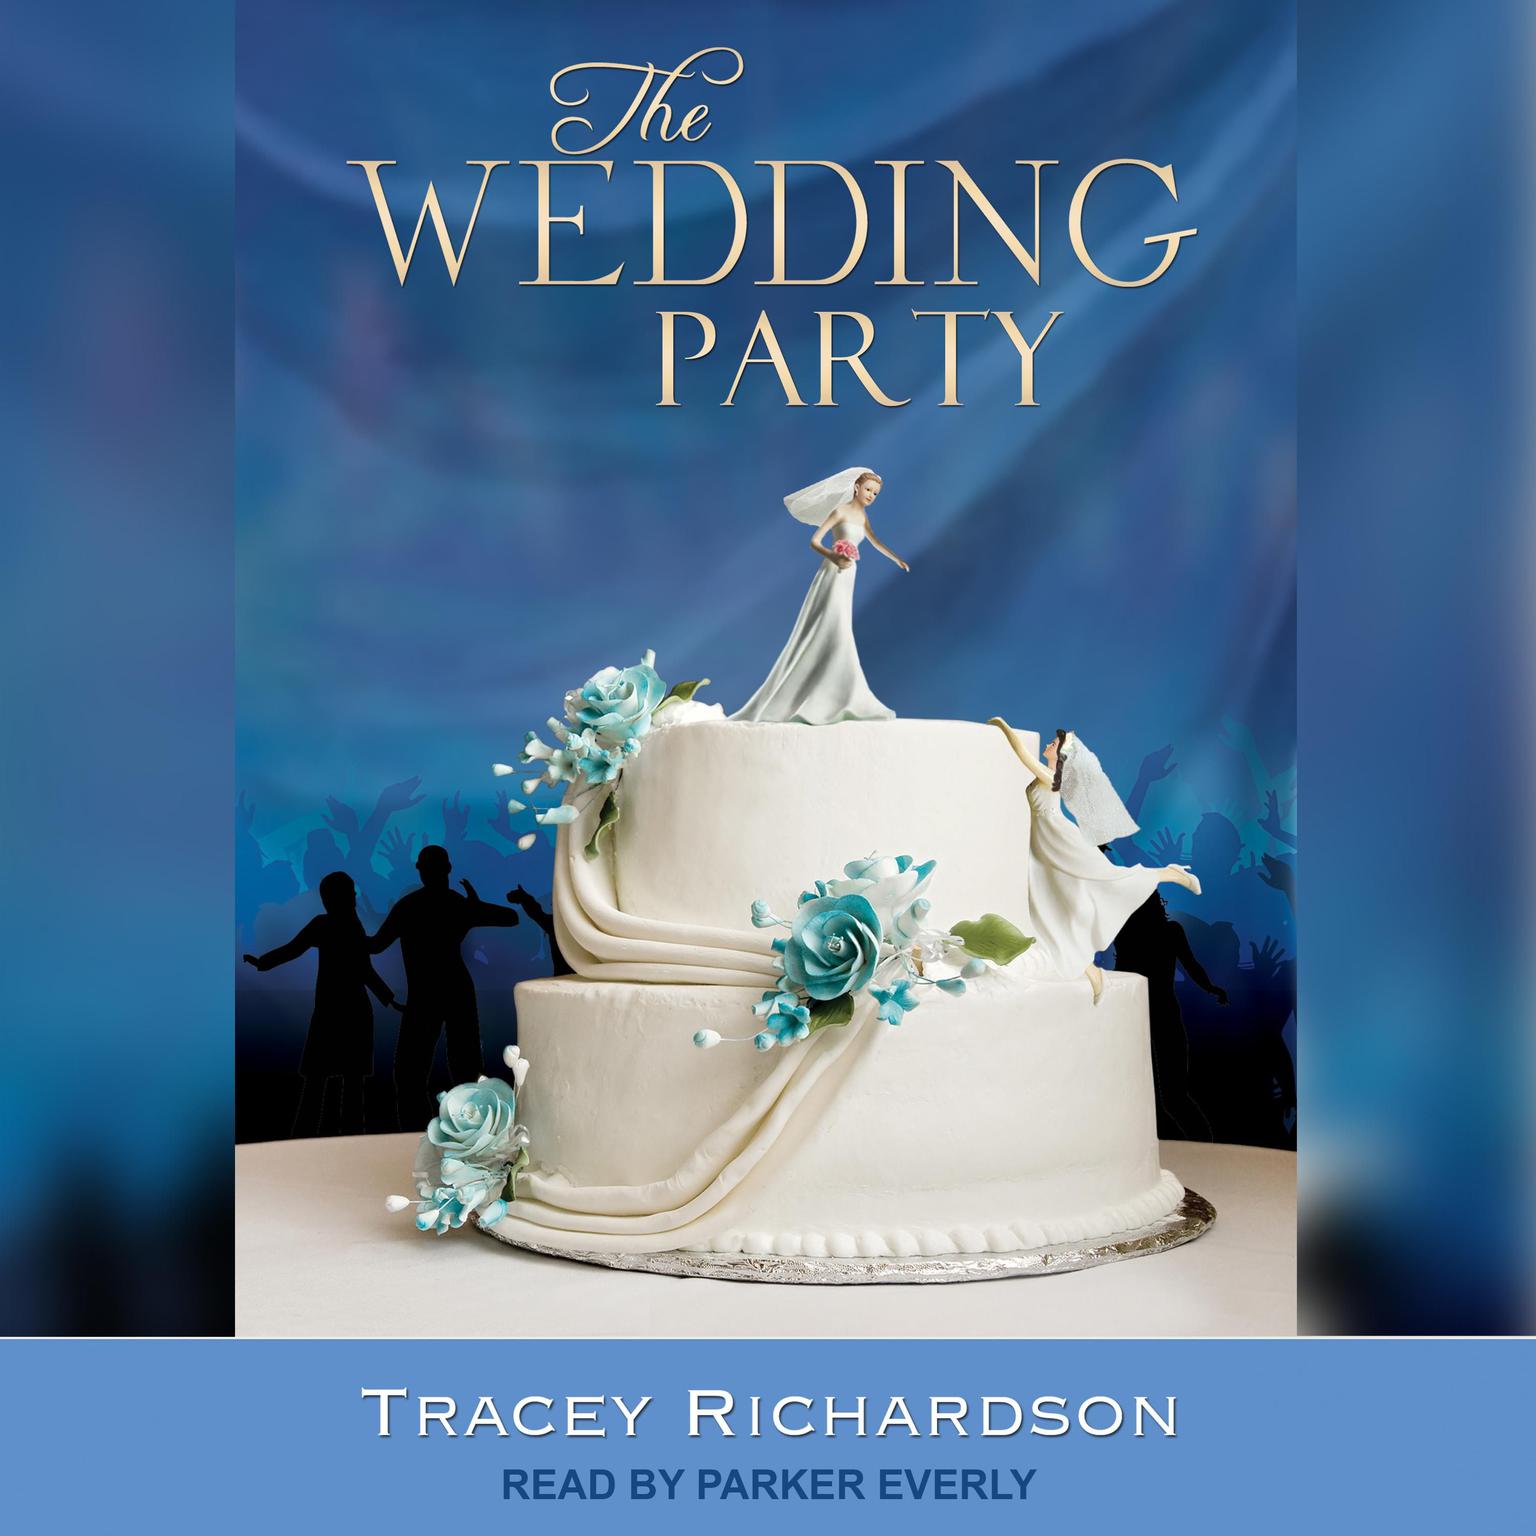 Parker Everly, Tracey Richardson: The Wedding Party (AudiobookFormat, 2011, Recorded Books, Inc.)